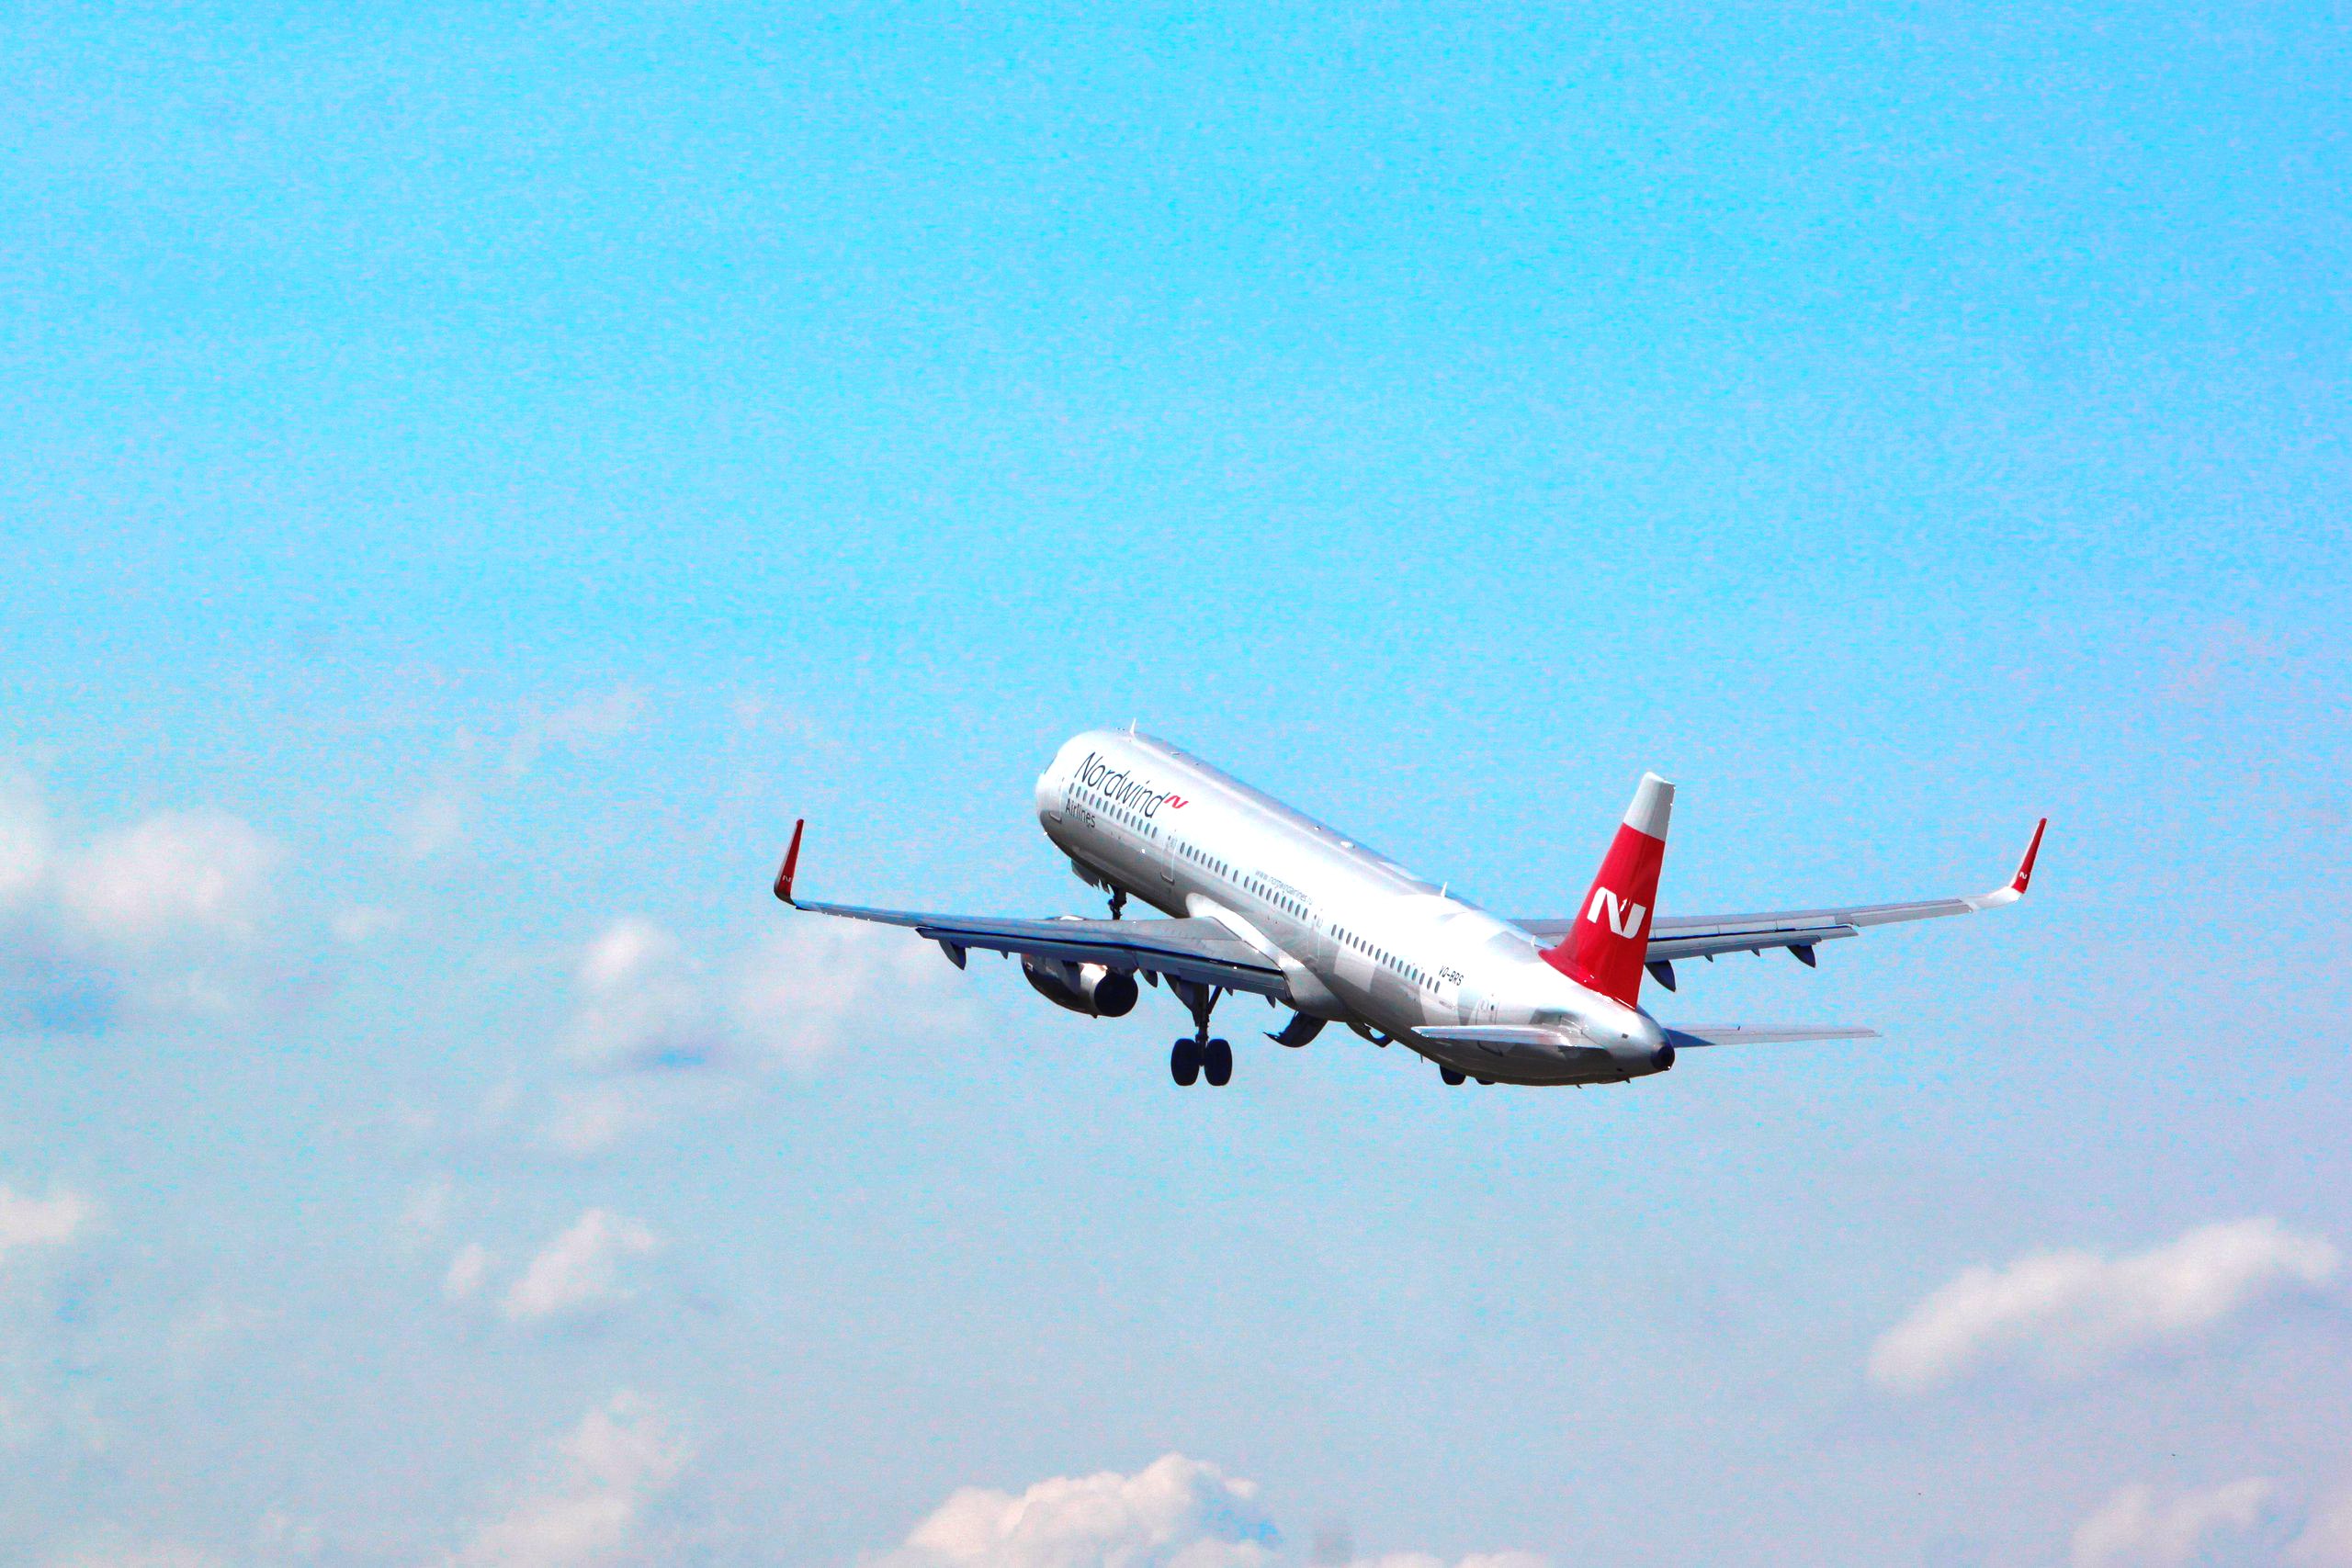  nordwind airlines     -  